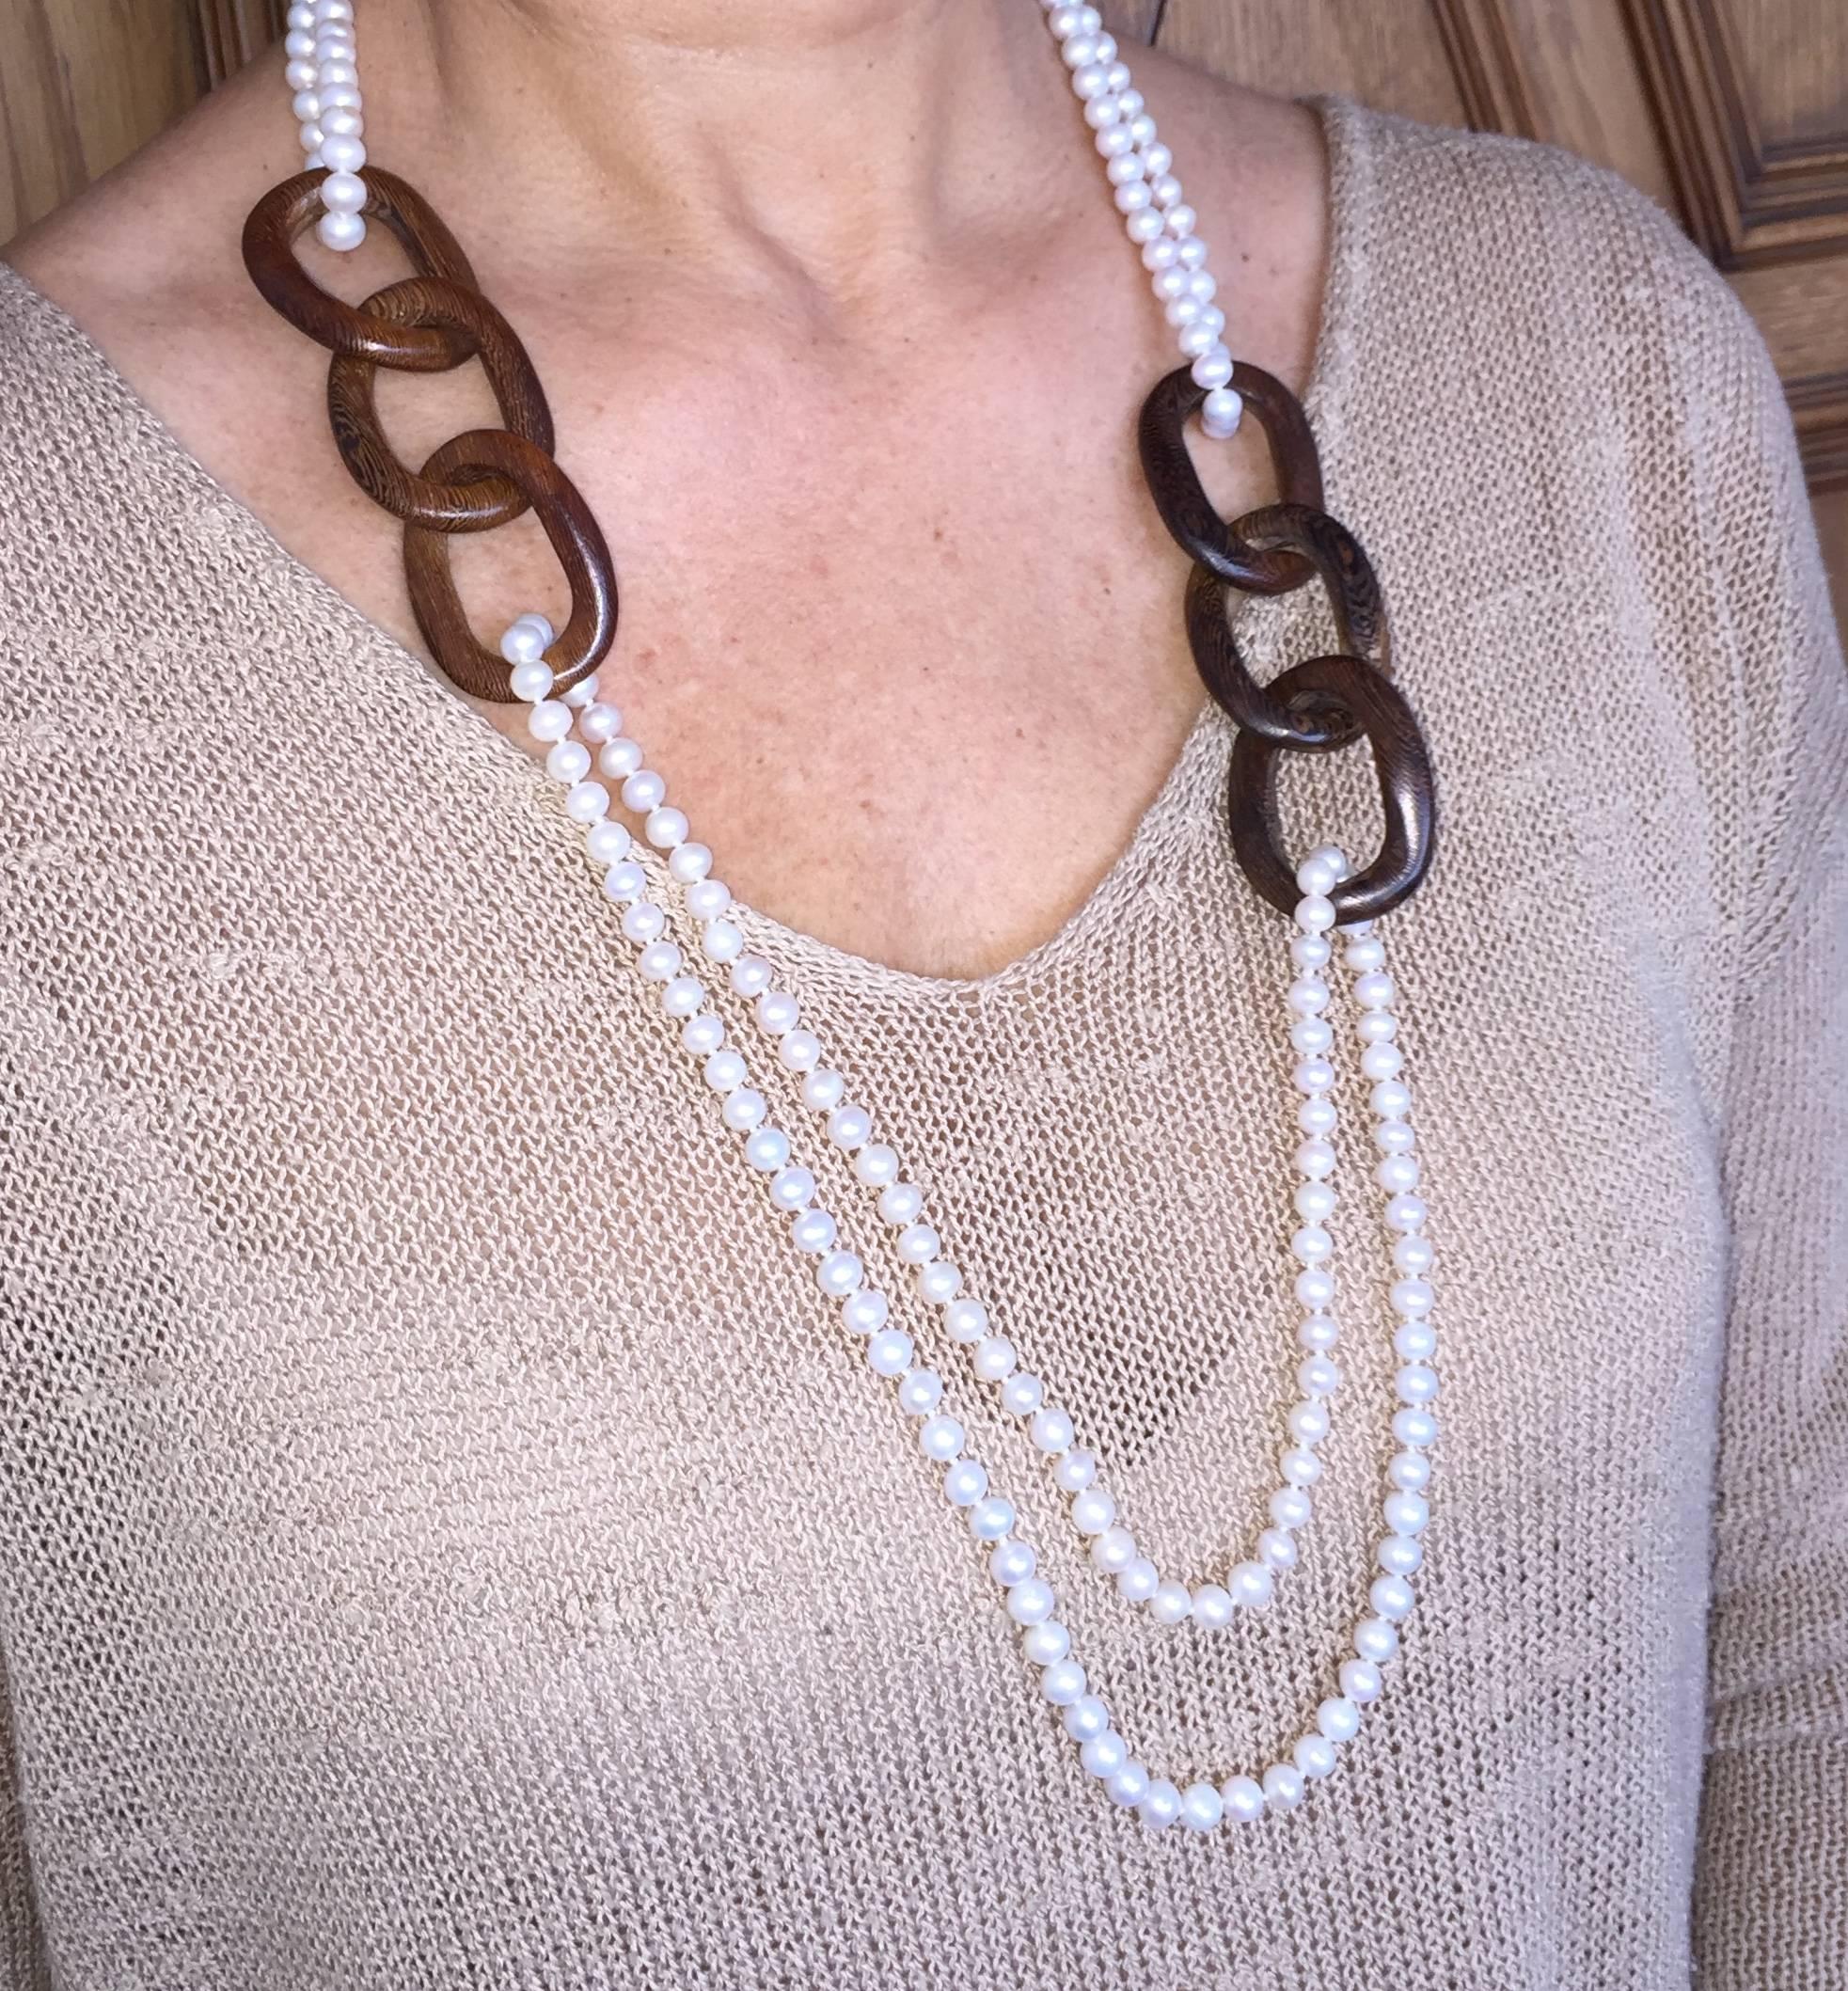 Wood and fresh water pearls sautoir.
In the day time you can wear it in a relaxed fashion, at night with a cosmopolitan elegance.
It looks good with all life styles.
Created by marion Jeantet
Pearls: 6 to 6.5mm
Price without local taxes